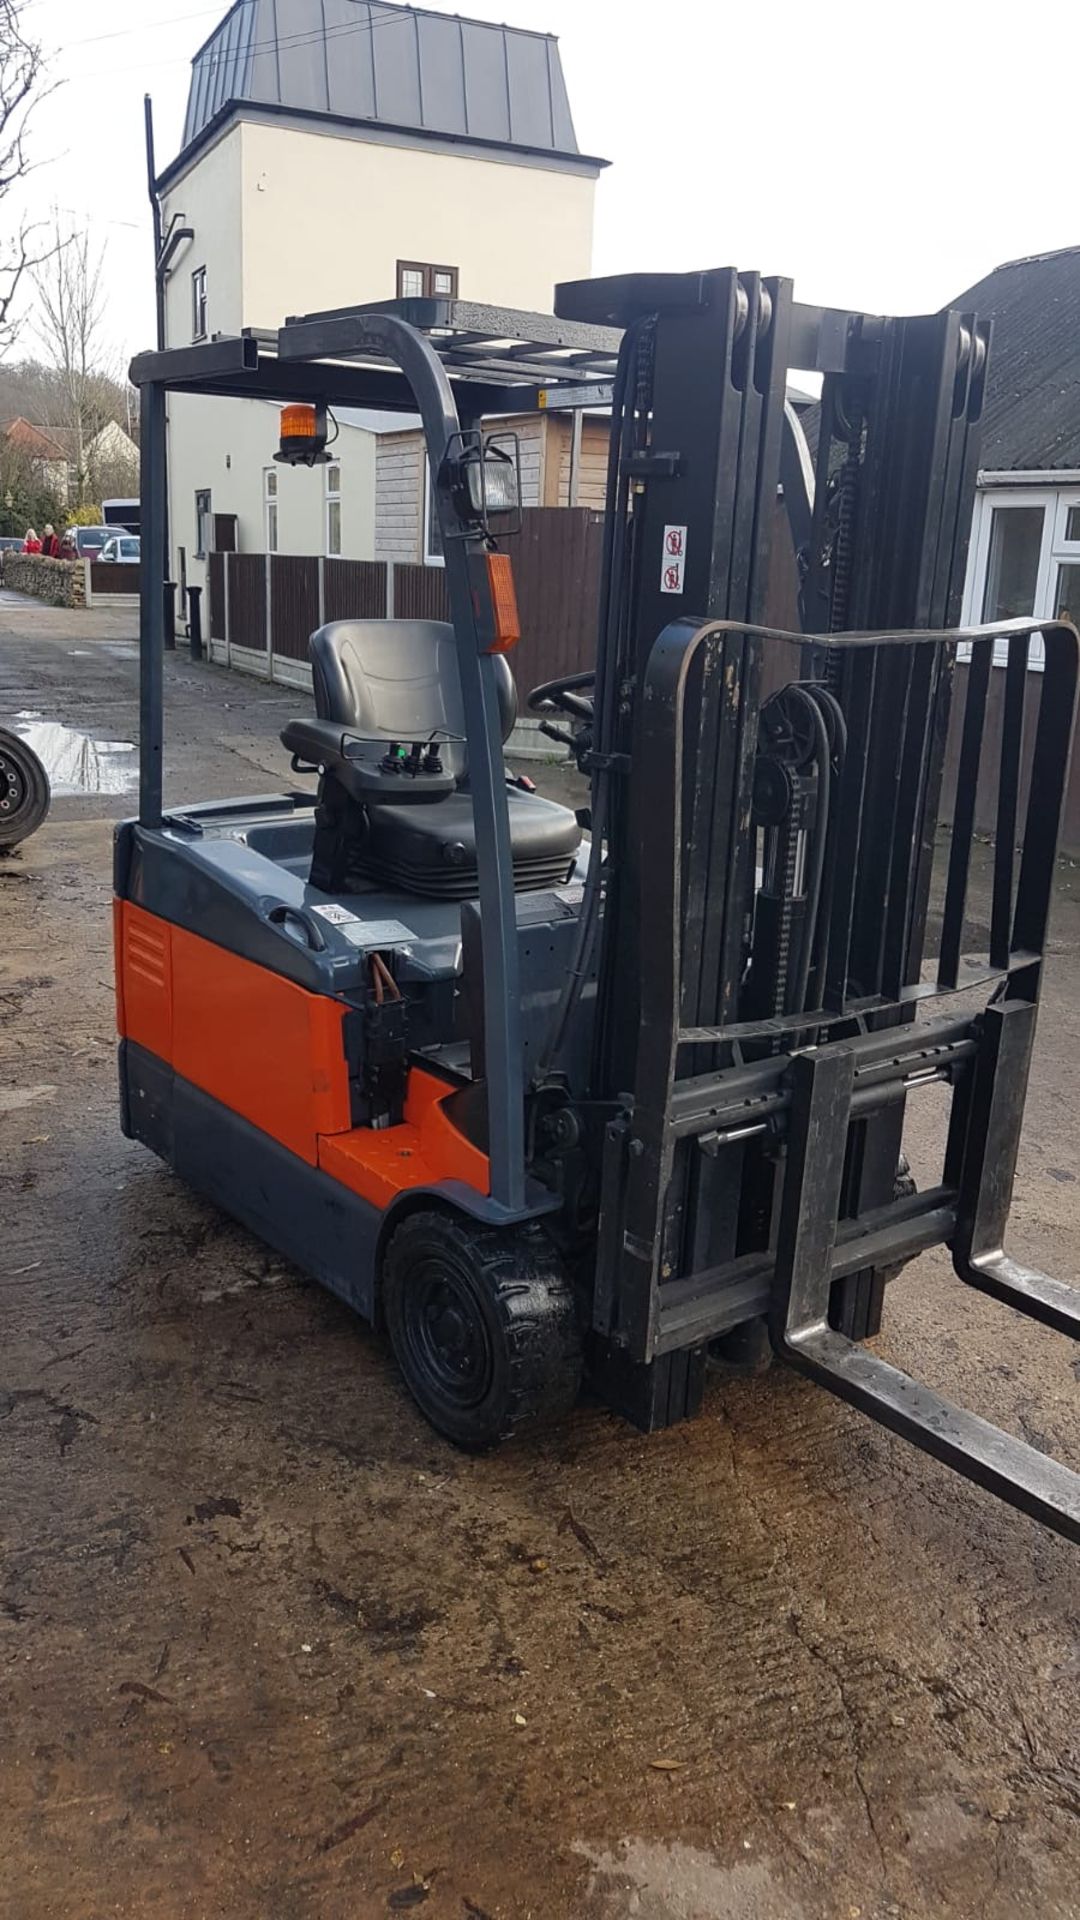 TOYOTA 7FBE15 3 WHEEL BATTERY POWERED FORKLIFT TRUCK, CONTAINER SPEC TRIPLE MAST WITH SIDE SHIFT,